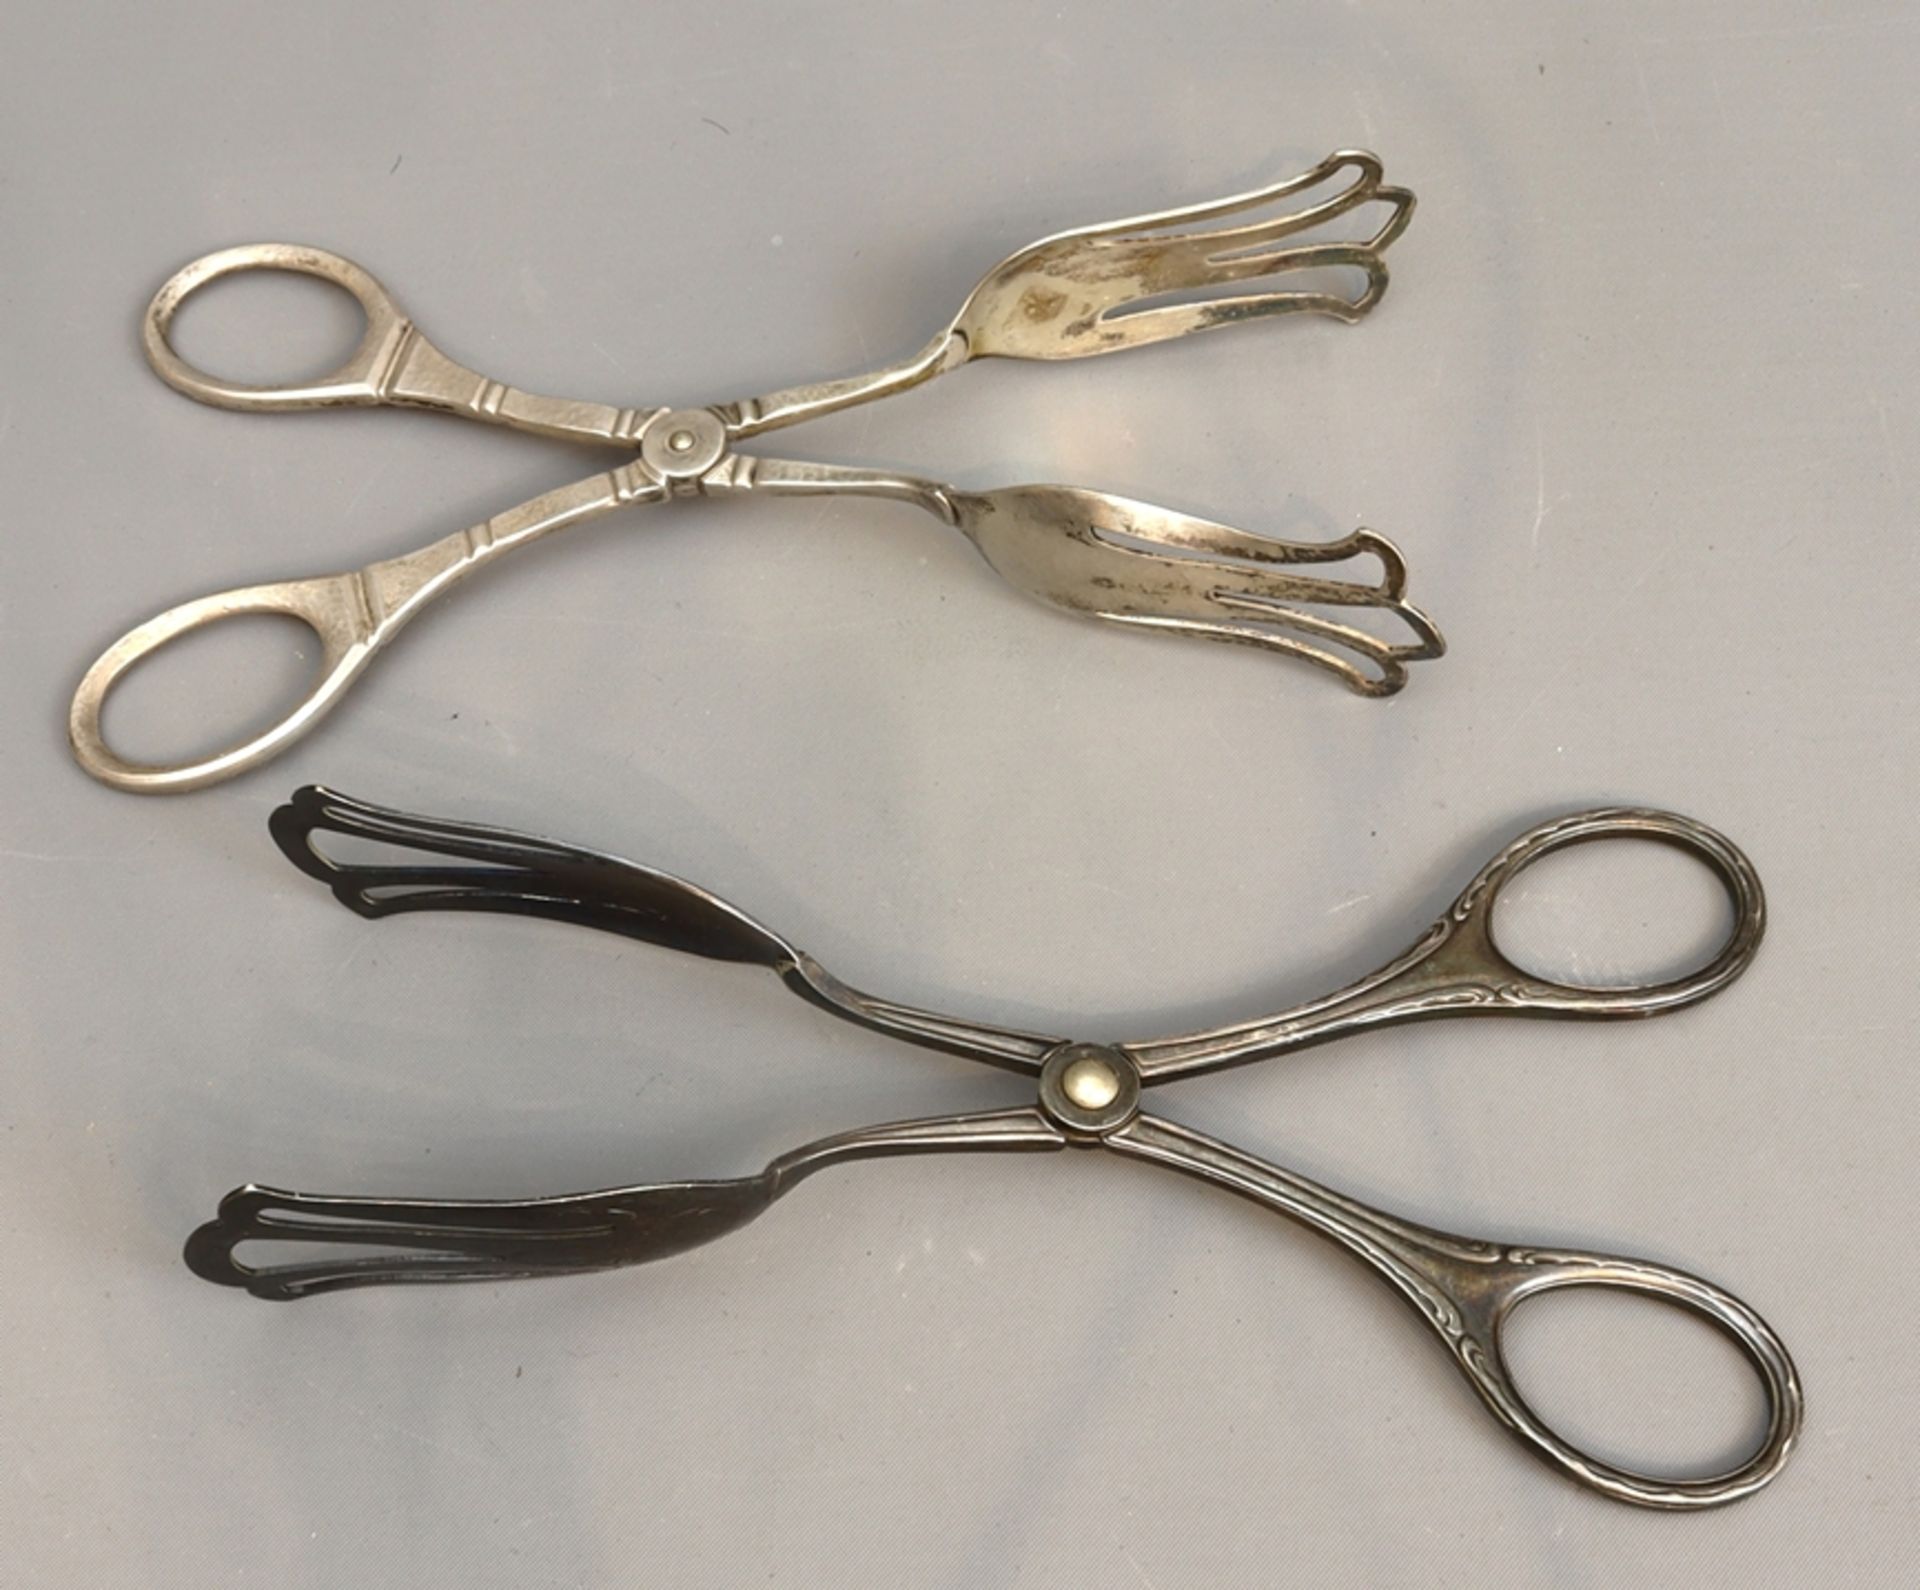 Lot of 4 pastry tongs of different types, early 20th c., German - Image 4 of 4